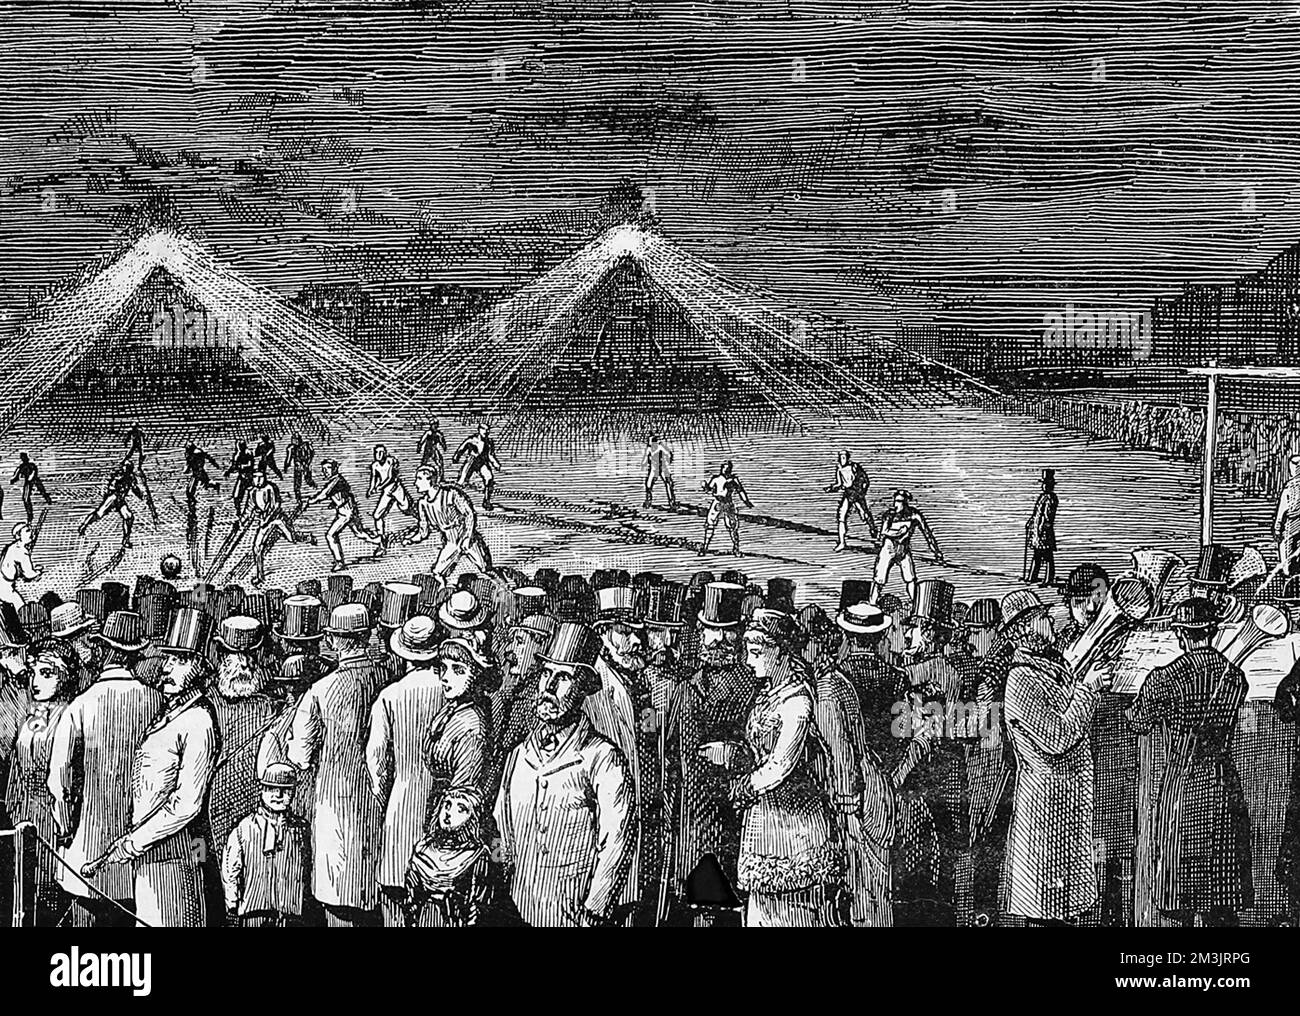 Spectators and players at a football match at Kennington Oval between the Wanderers and the Clapham Rovers illuminated by the new lighting system, which on this occasion was reported to be unsatisfactory due to the positioning of the lights. As illustrated in the sketch, the light caused shifting shadows and was confusing to the players. Stock Photo